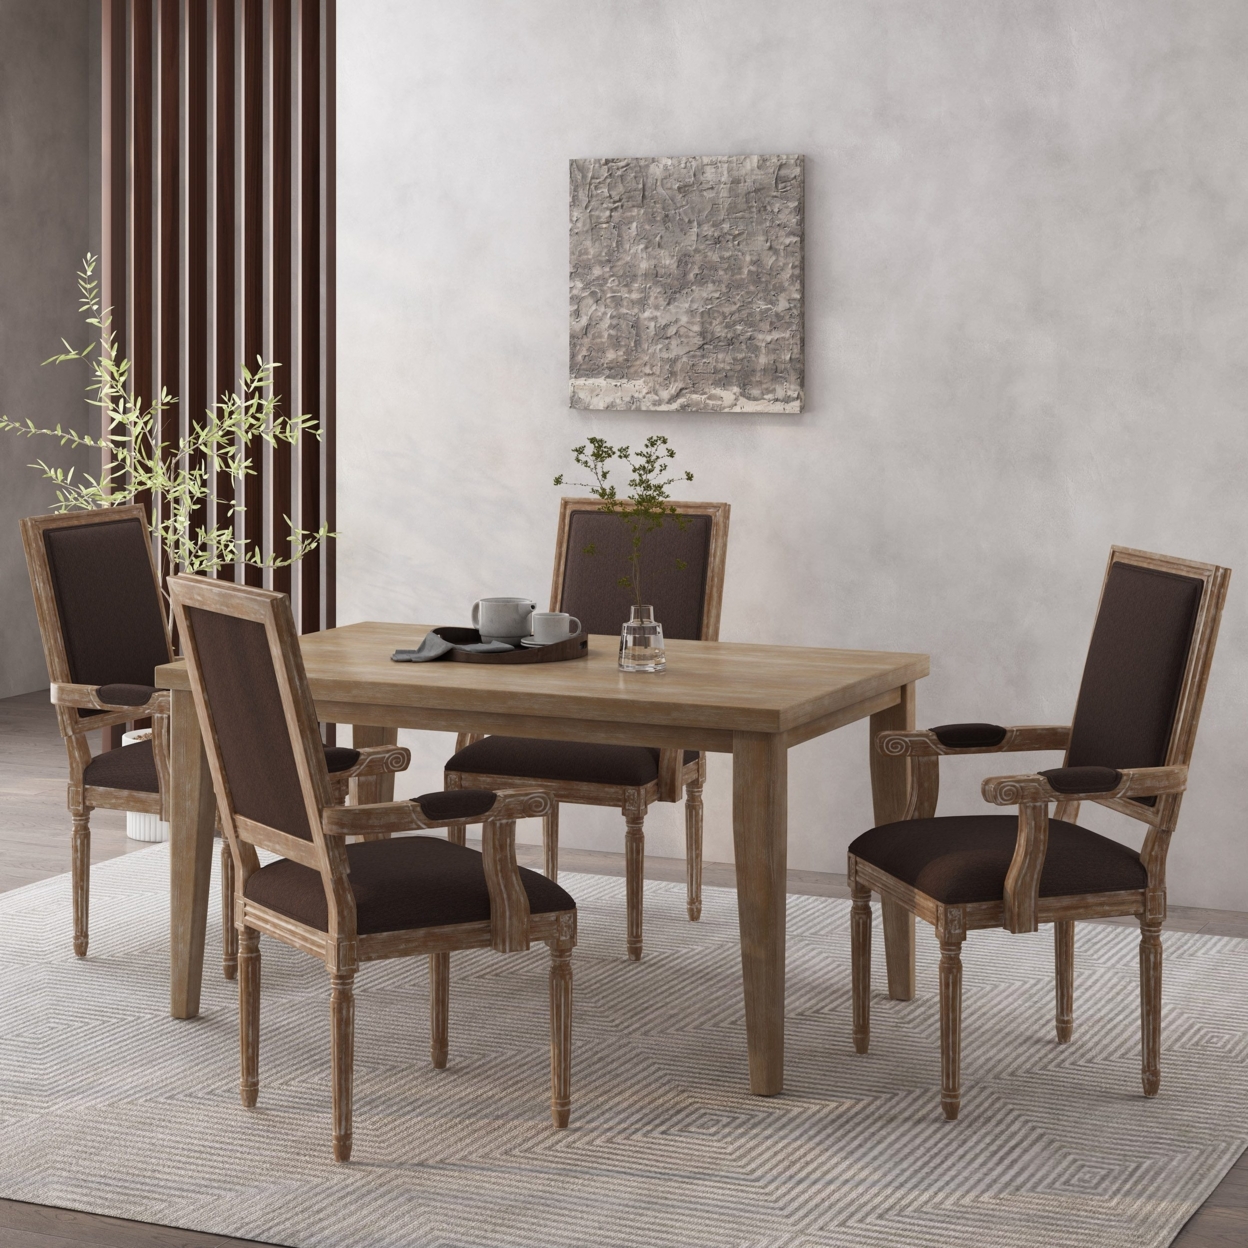 Zentner French Country Wood Upholstered Dining Chair - Natural/brown, Set Of 4